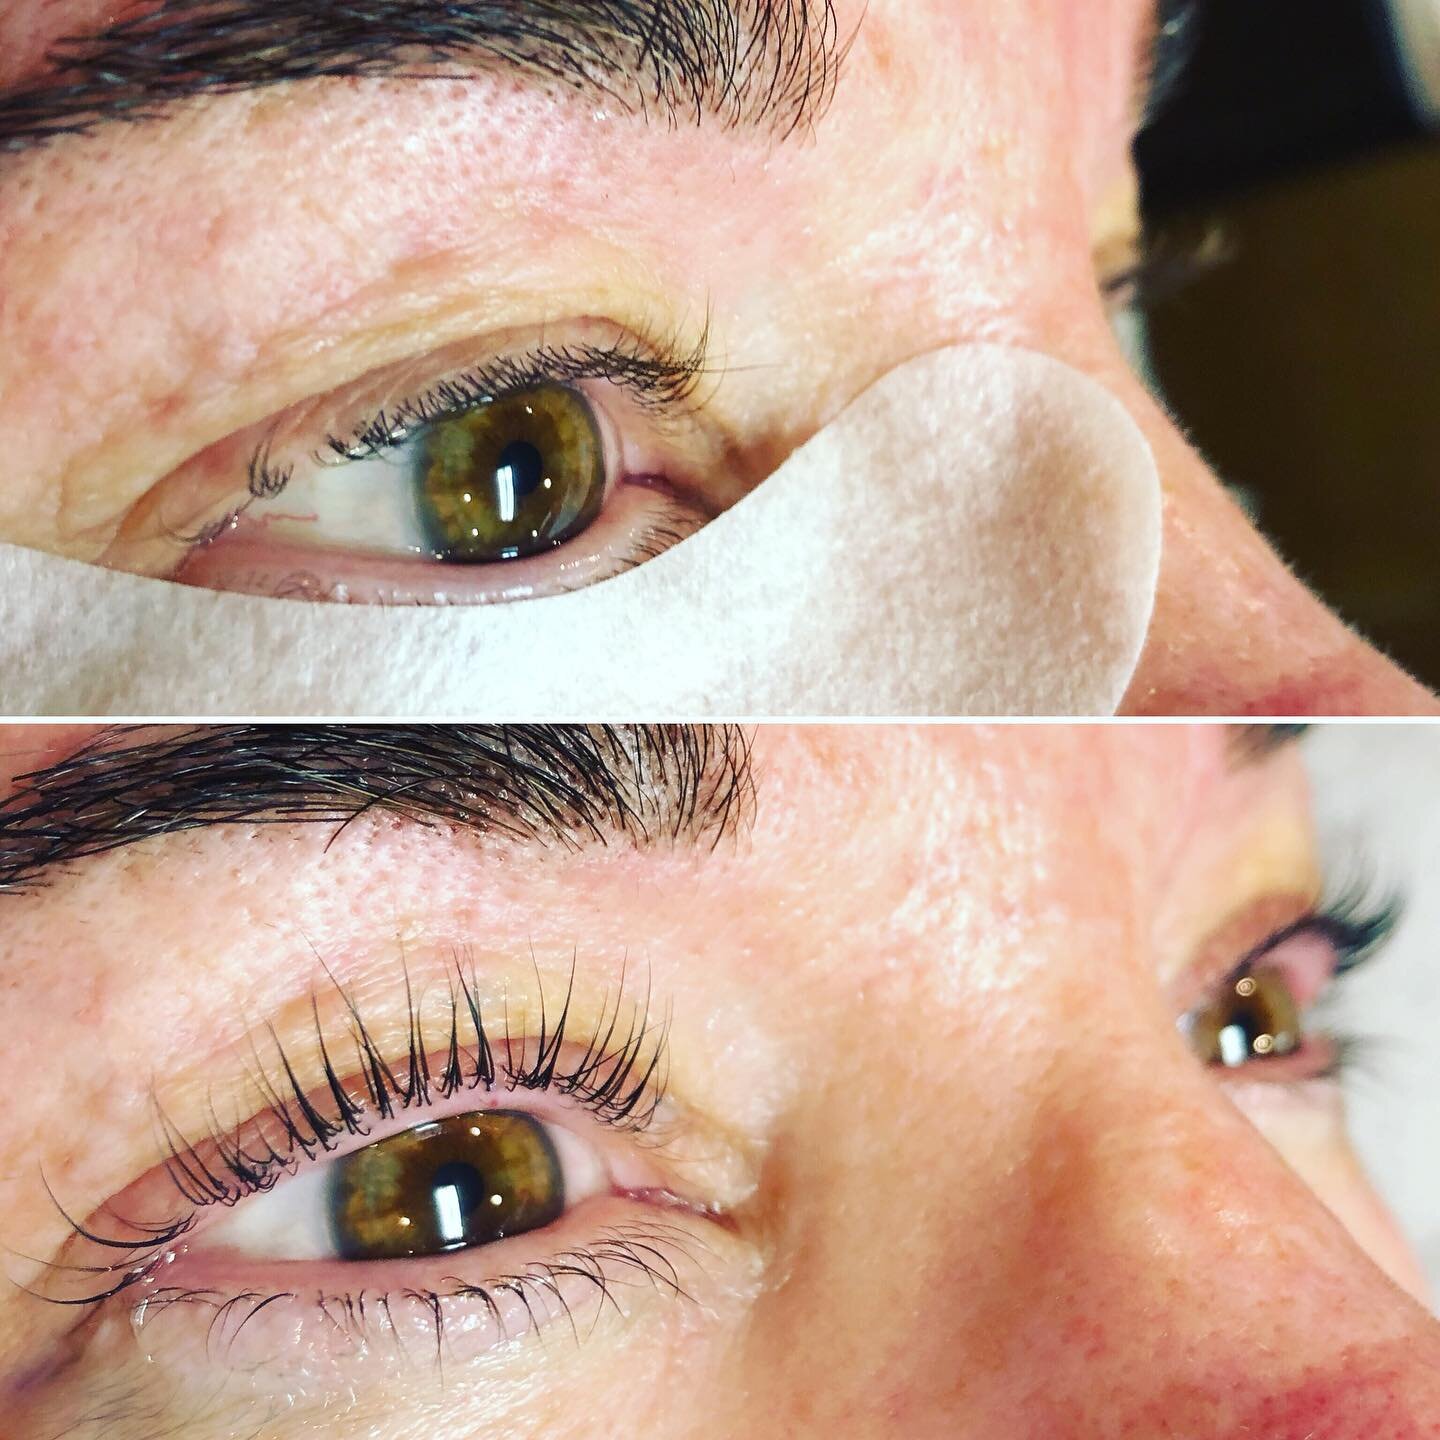 Another beautiful lash lift at @naviabeautystudio 🦋 
This client had a missing gap of lashes from tweezing, and lashes that were curling inward causing irritation. I recommended a lash growth serum like @babe_lash (which I offer at @naviabeautystudi